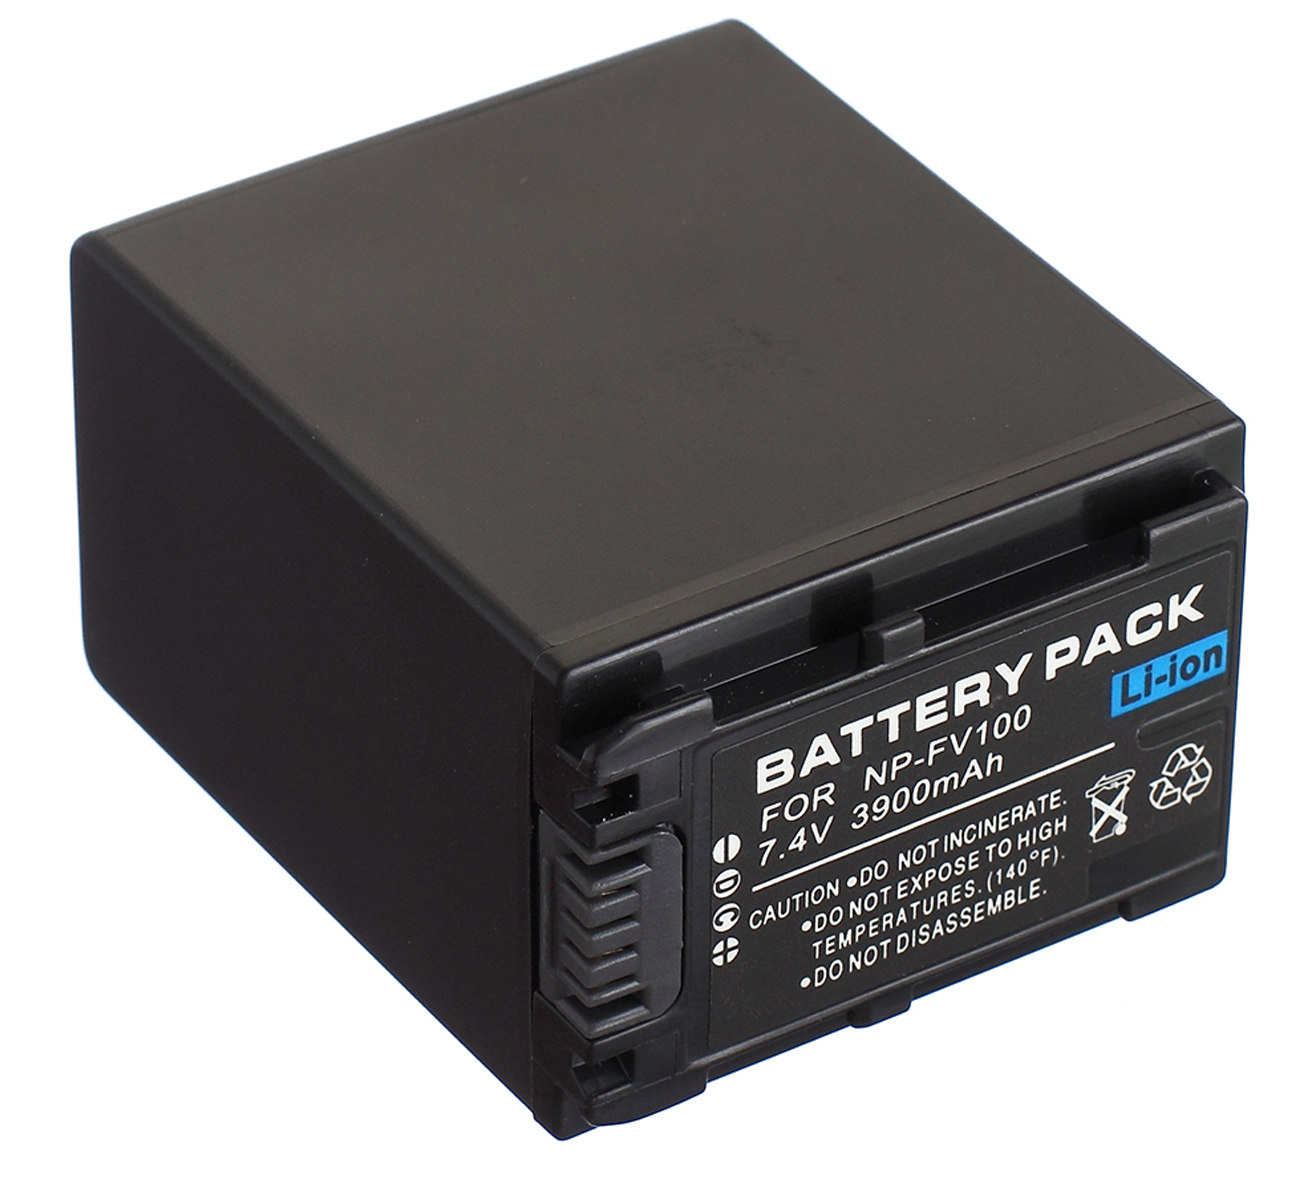 Batterij Pack Voor Sony HDR-CX110E, HDR-CX115E, HDR-CX130E, HDR-CX150E, HDR-CX160E, HDR-CX170E, HDR-CX180E, HDR-CX190E Handycam Camcorder